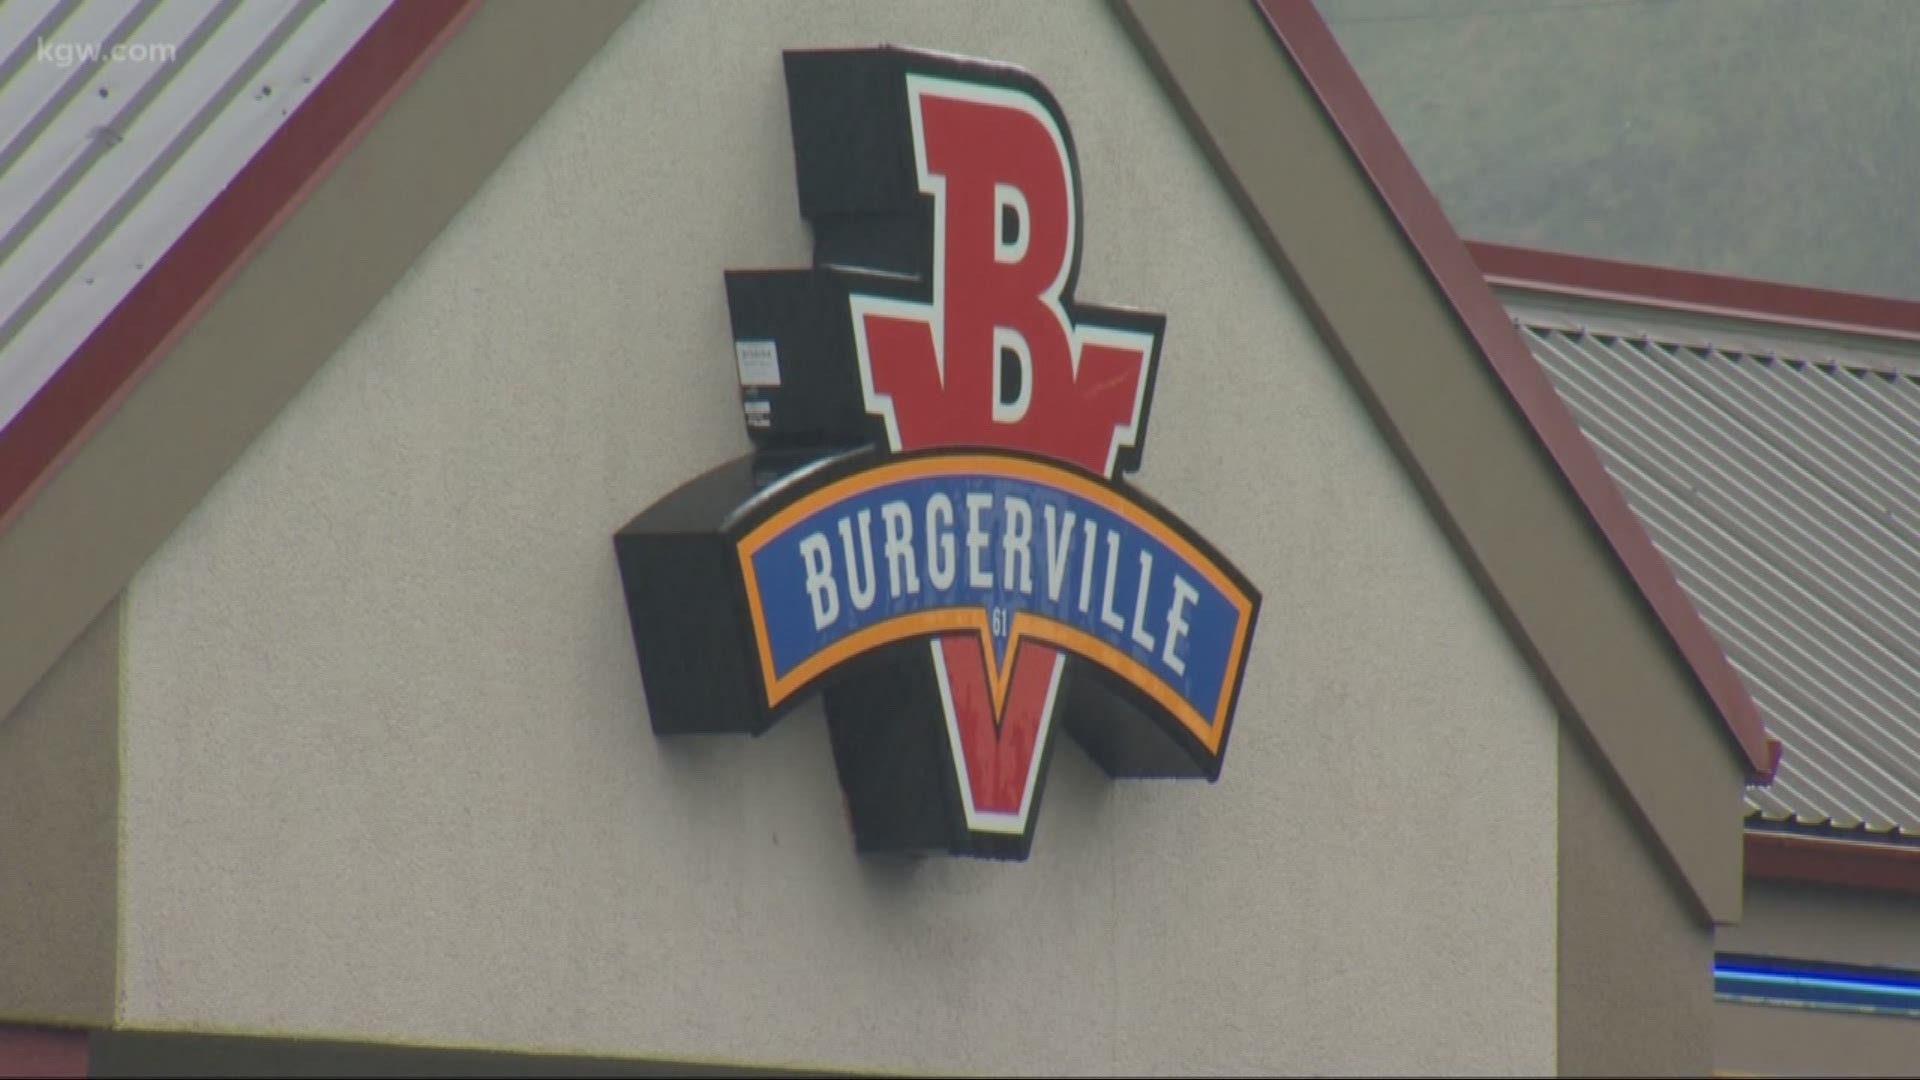 Employees at a SE Portland Burgerville are celebrating after the restaurant chain said it won't challenge an employee vote to unionize.